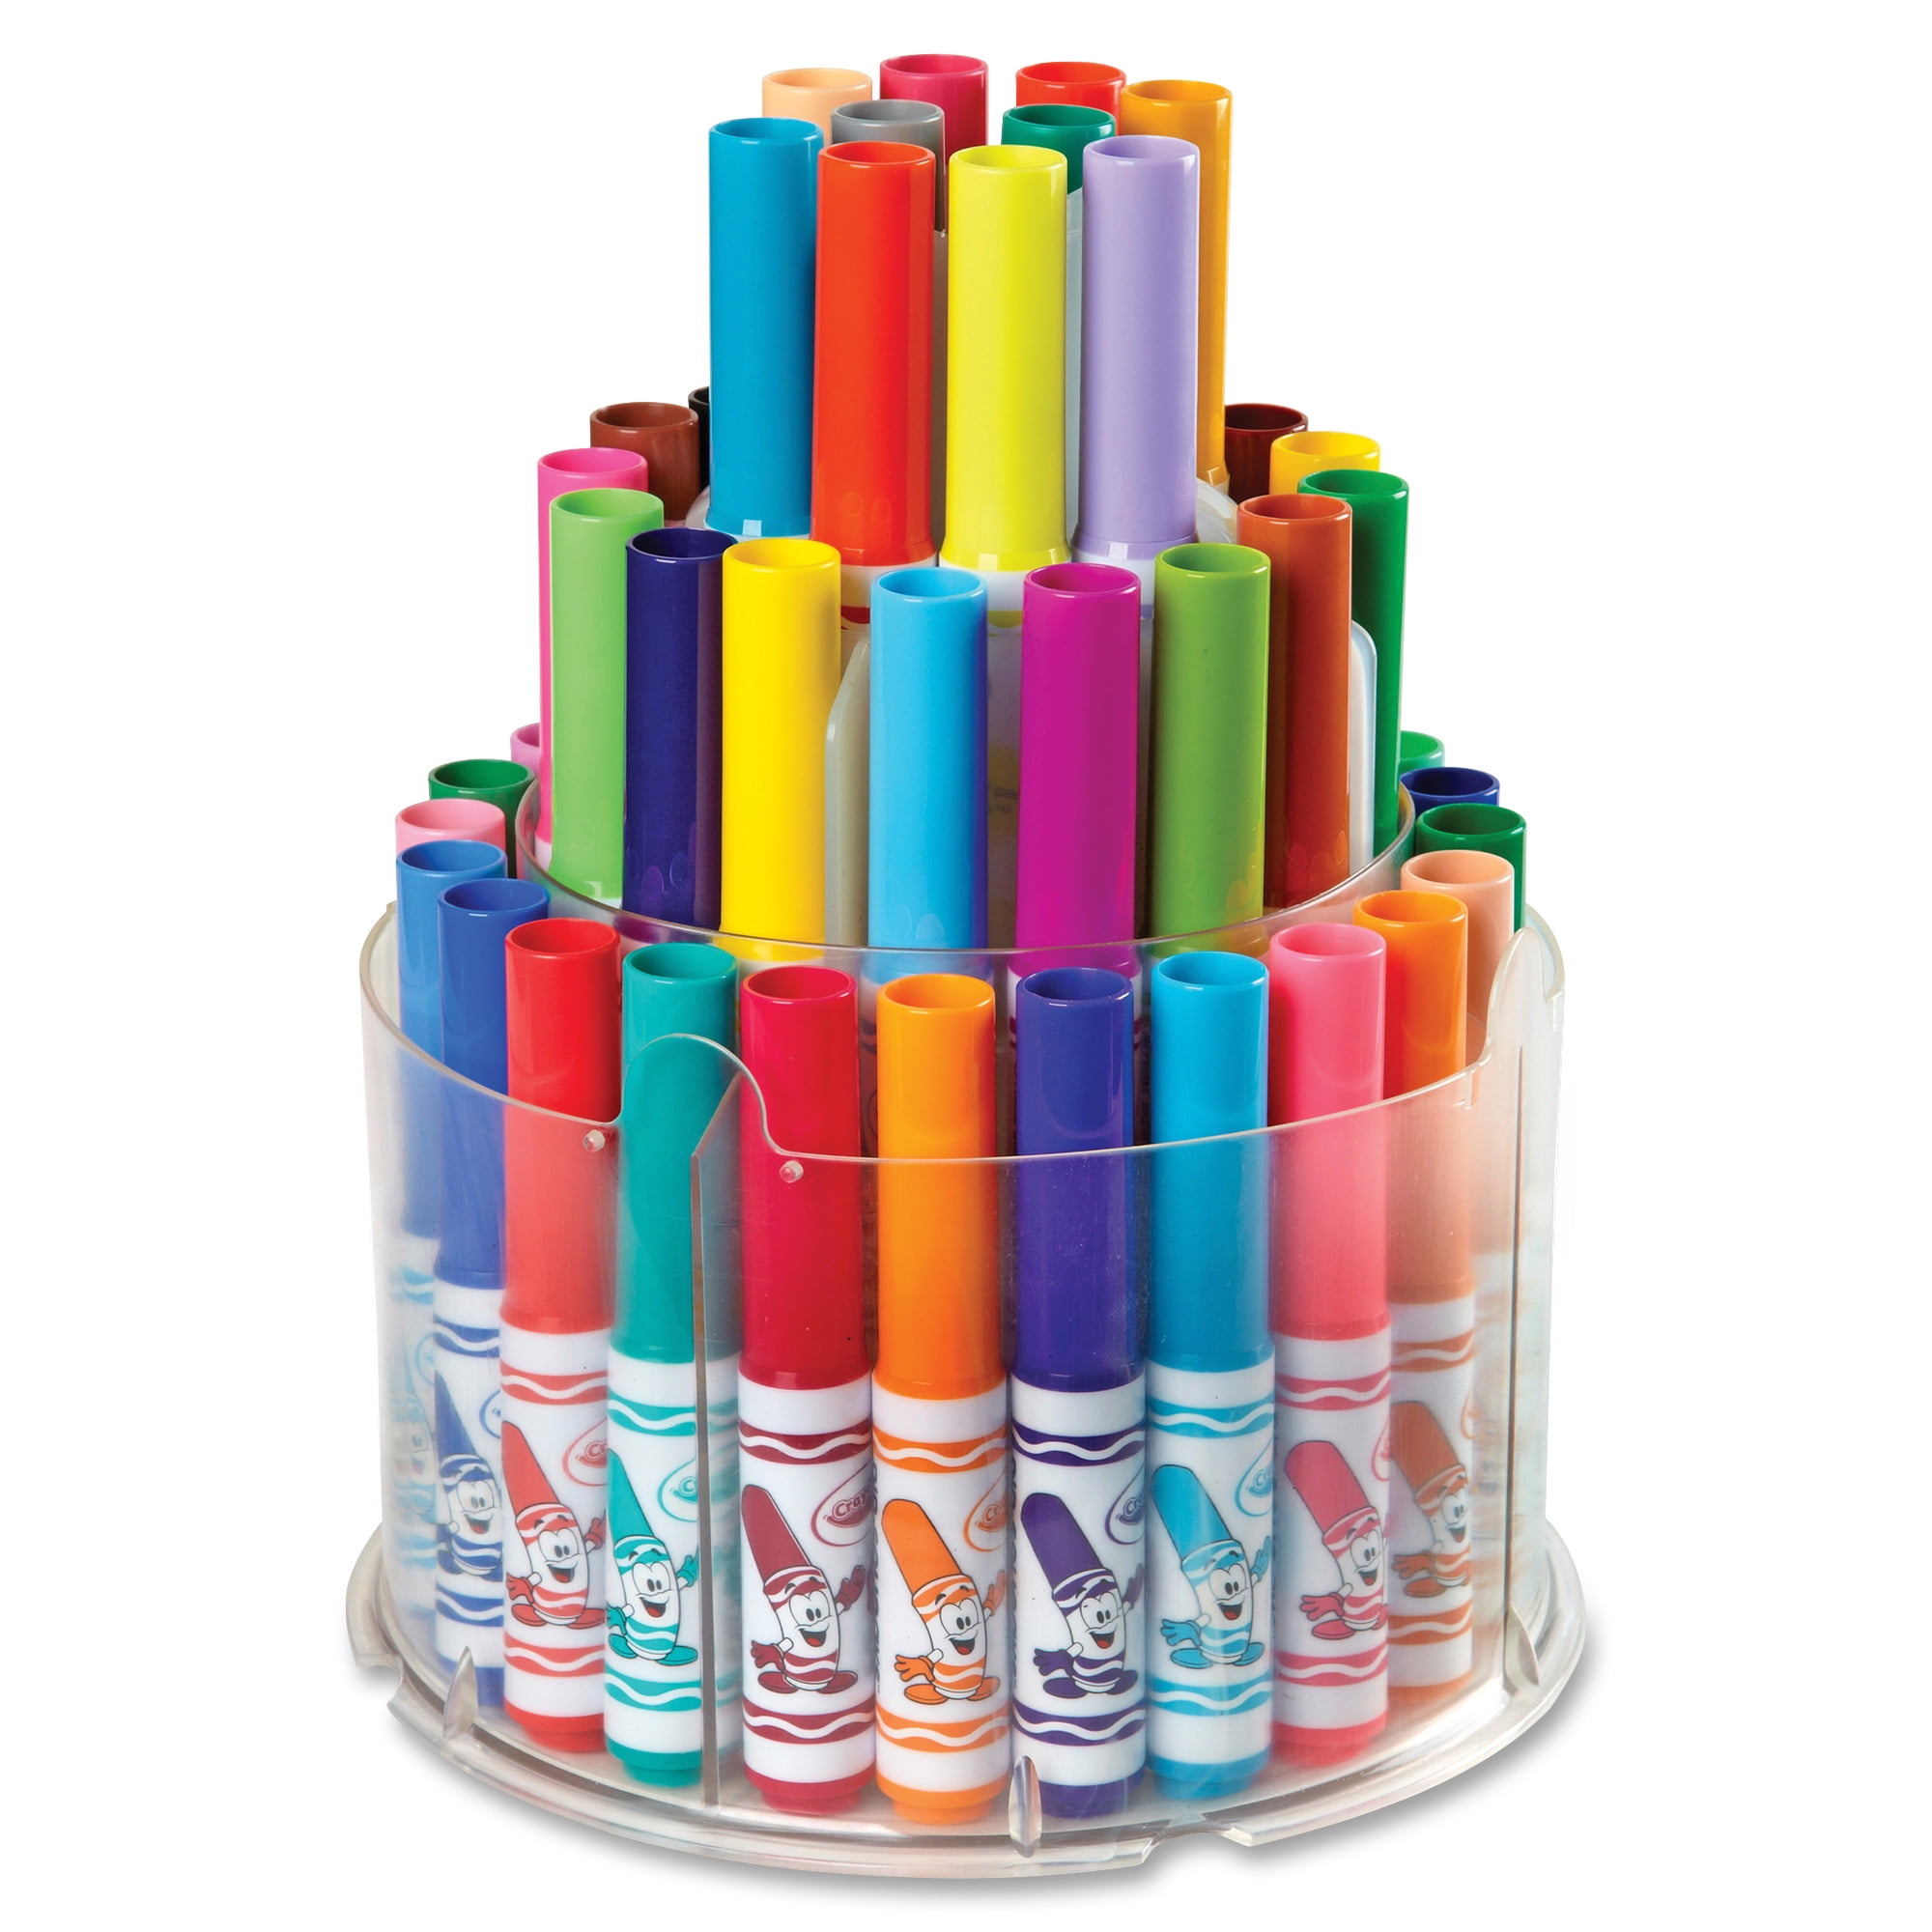 Up to 75% OFF! Crayola Pip-Squeaks Non-Toxic Washable Marker with  Telescoping Tower, 4-1/8 L in, Assorted Colors, Pack of 50 -  strictlyforkidsstore.co